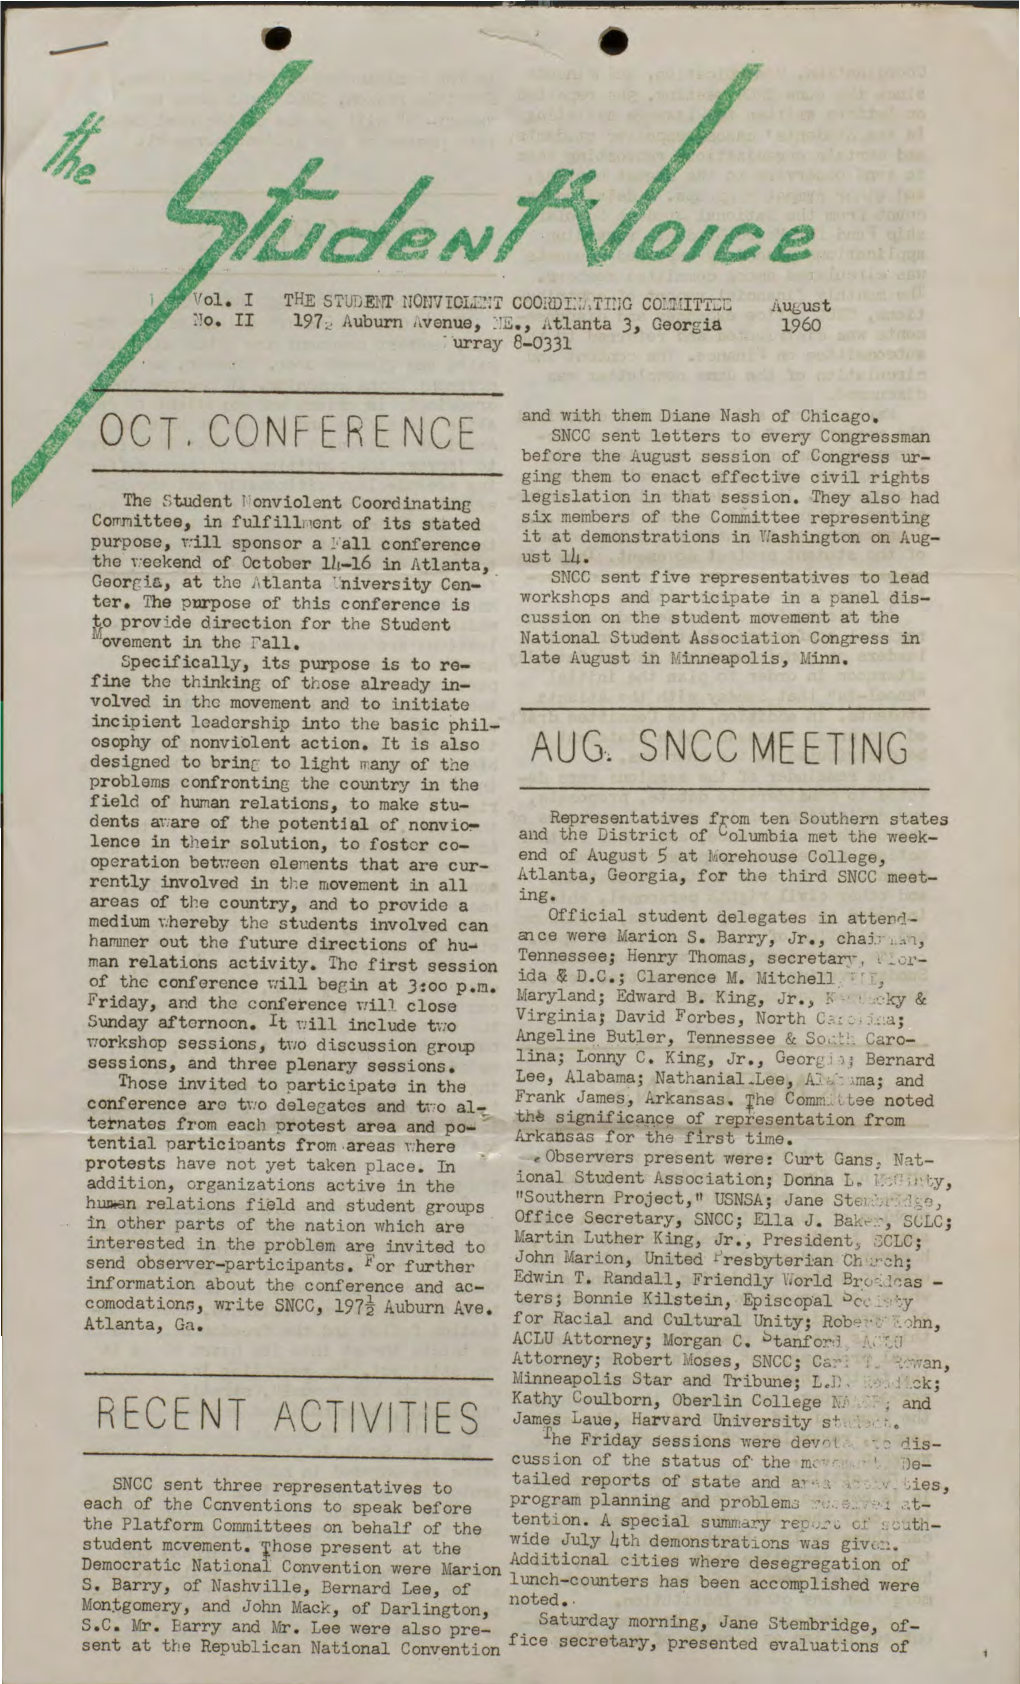 Student Voice, August, 1960